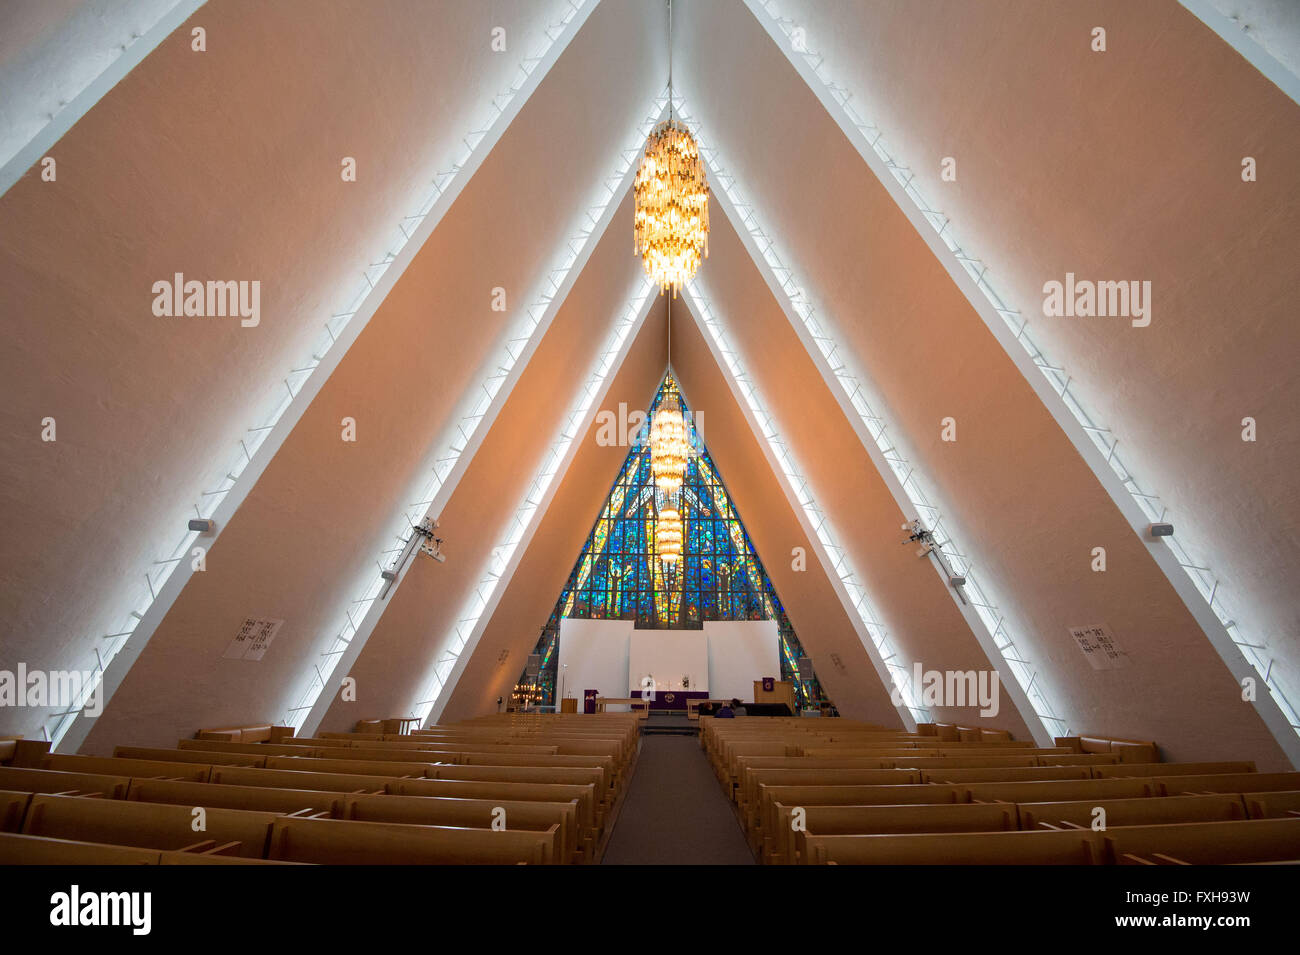 Interior view of the Arctic Cathedral, formally known as Tromsdalen Church or Tromsøysund Church in Tromso, Norway. Stock Photo